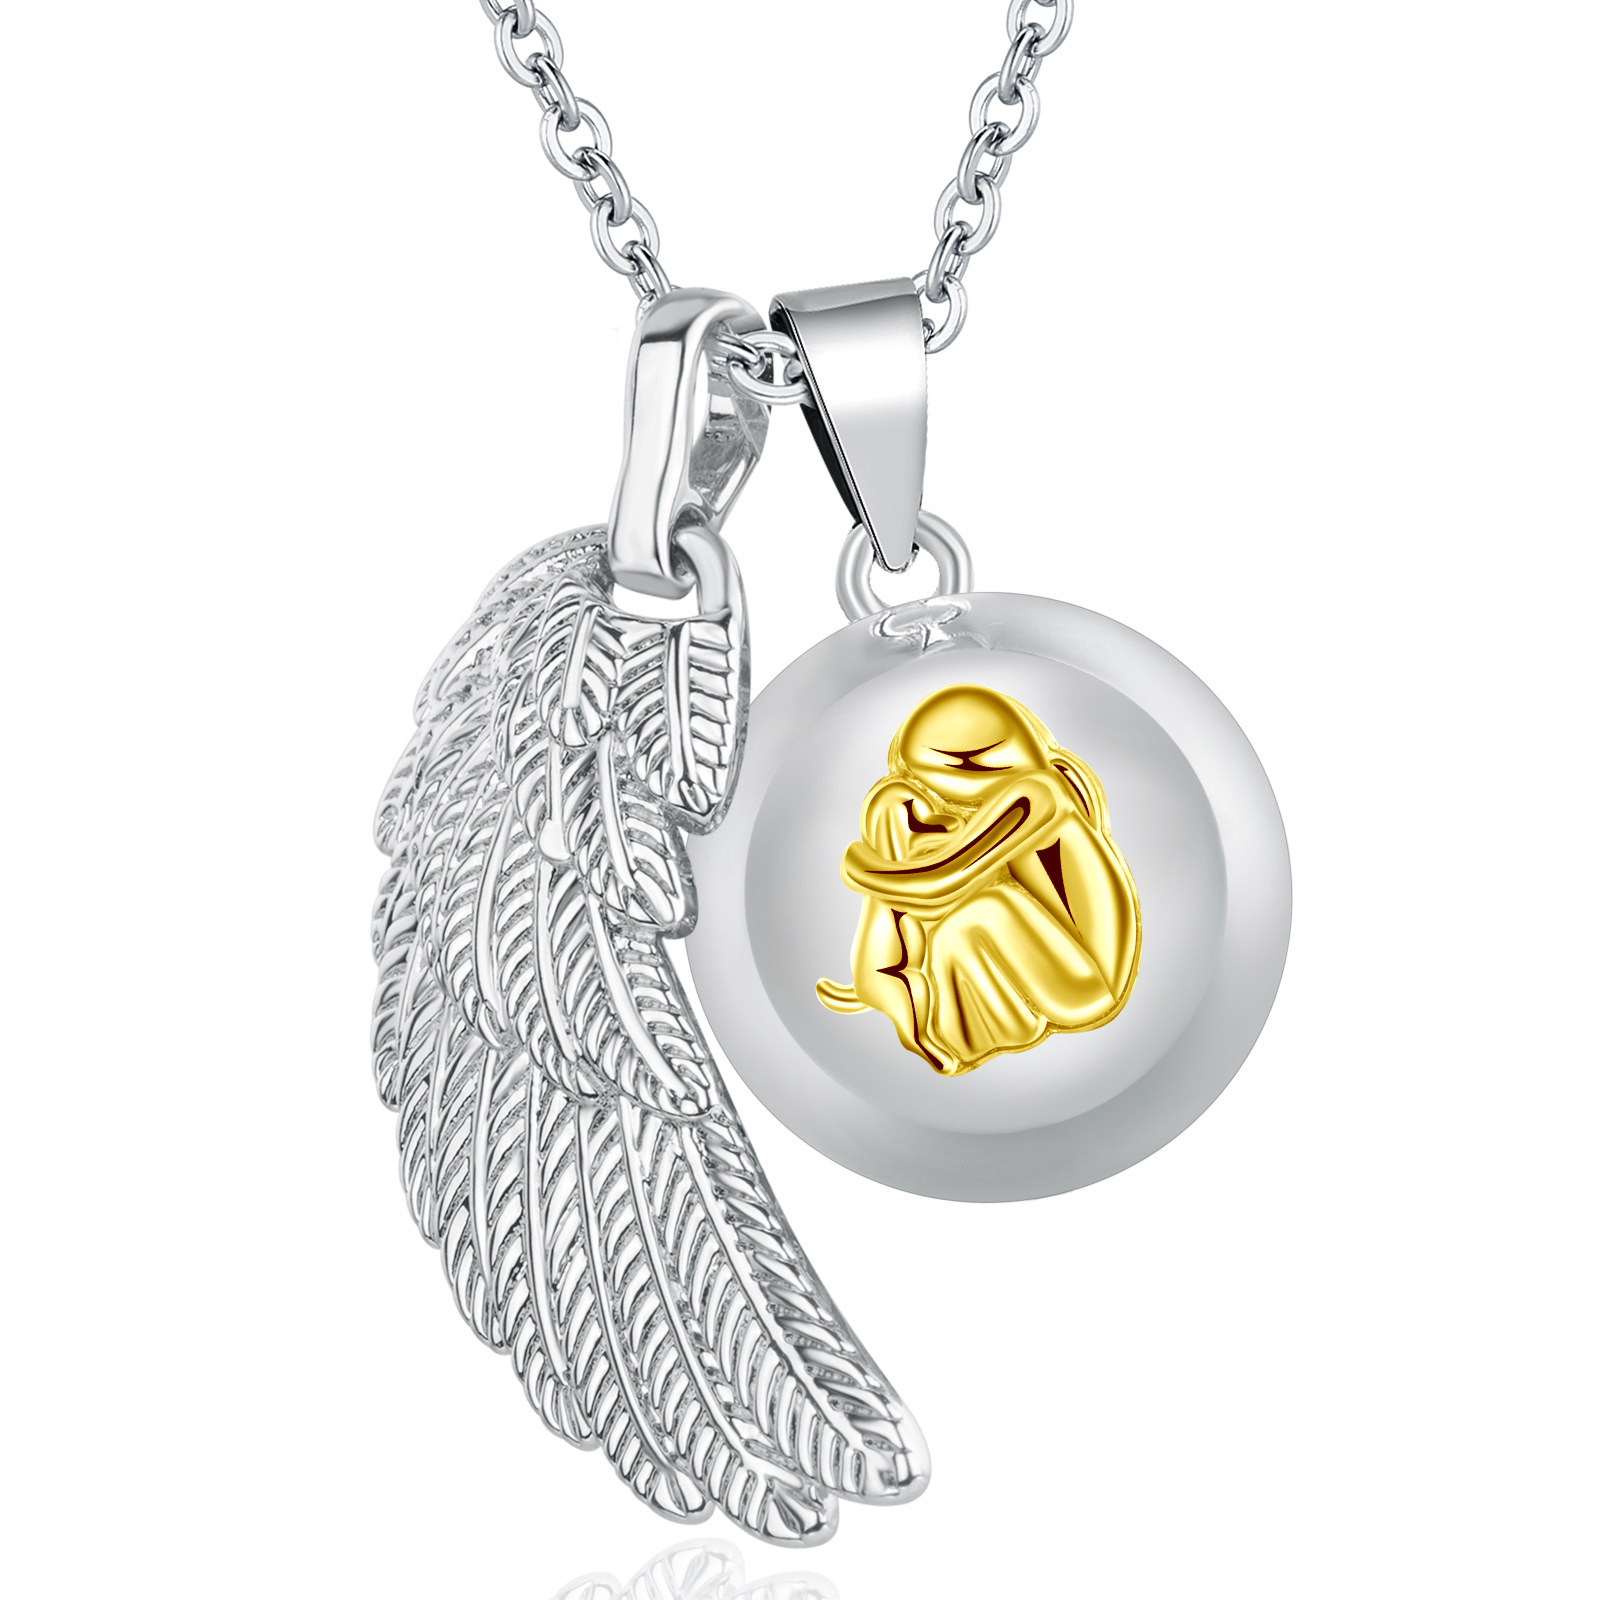 Merryshine Jewelry S925 Sterling Silver Girl and Dog Pattern Harmony Chime Ball Necklace